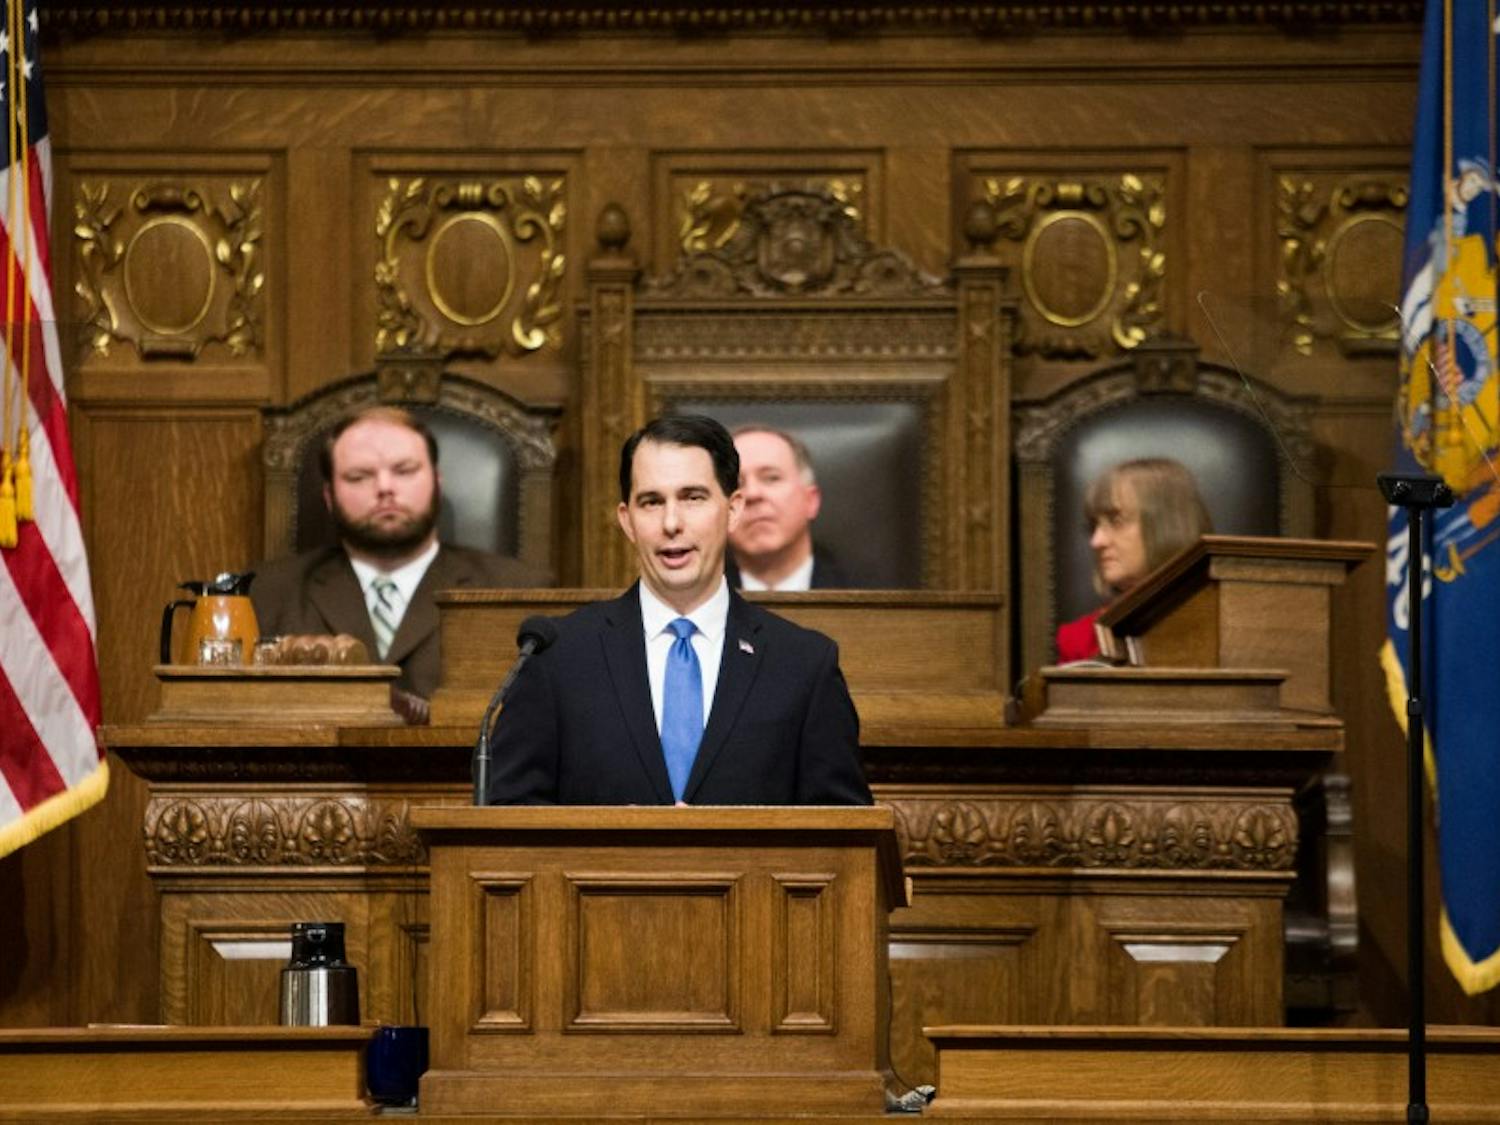 The U.S. Supreme Court voted Monday to end a John Doe investigation into Gov. Scott Walker’s campaign activities.